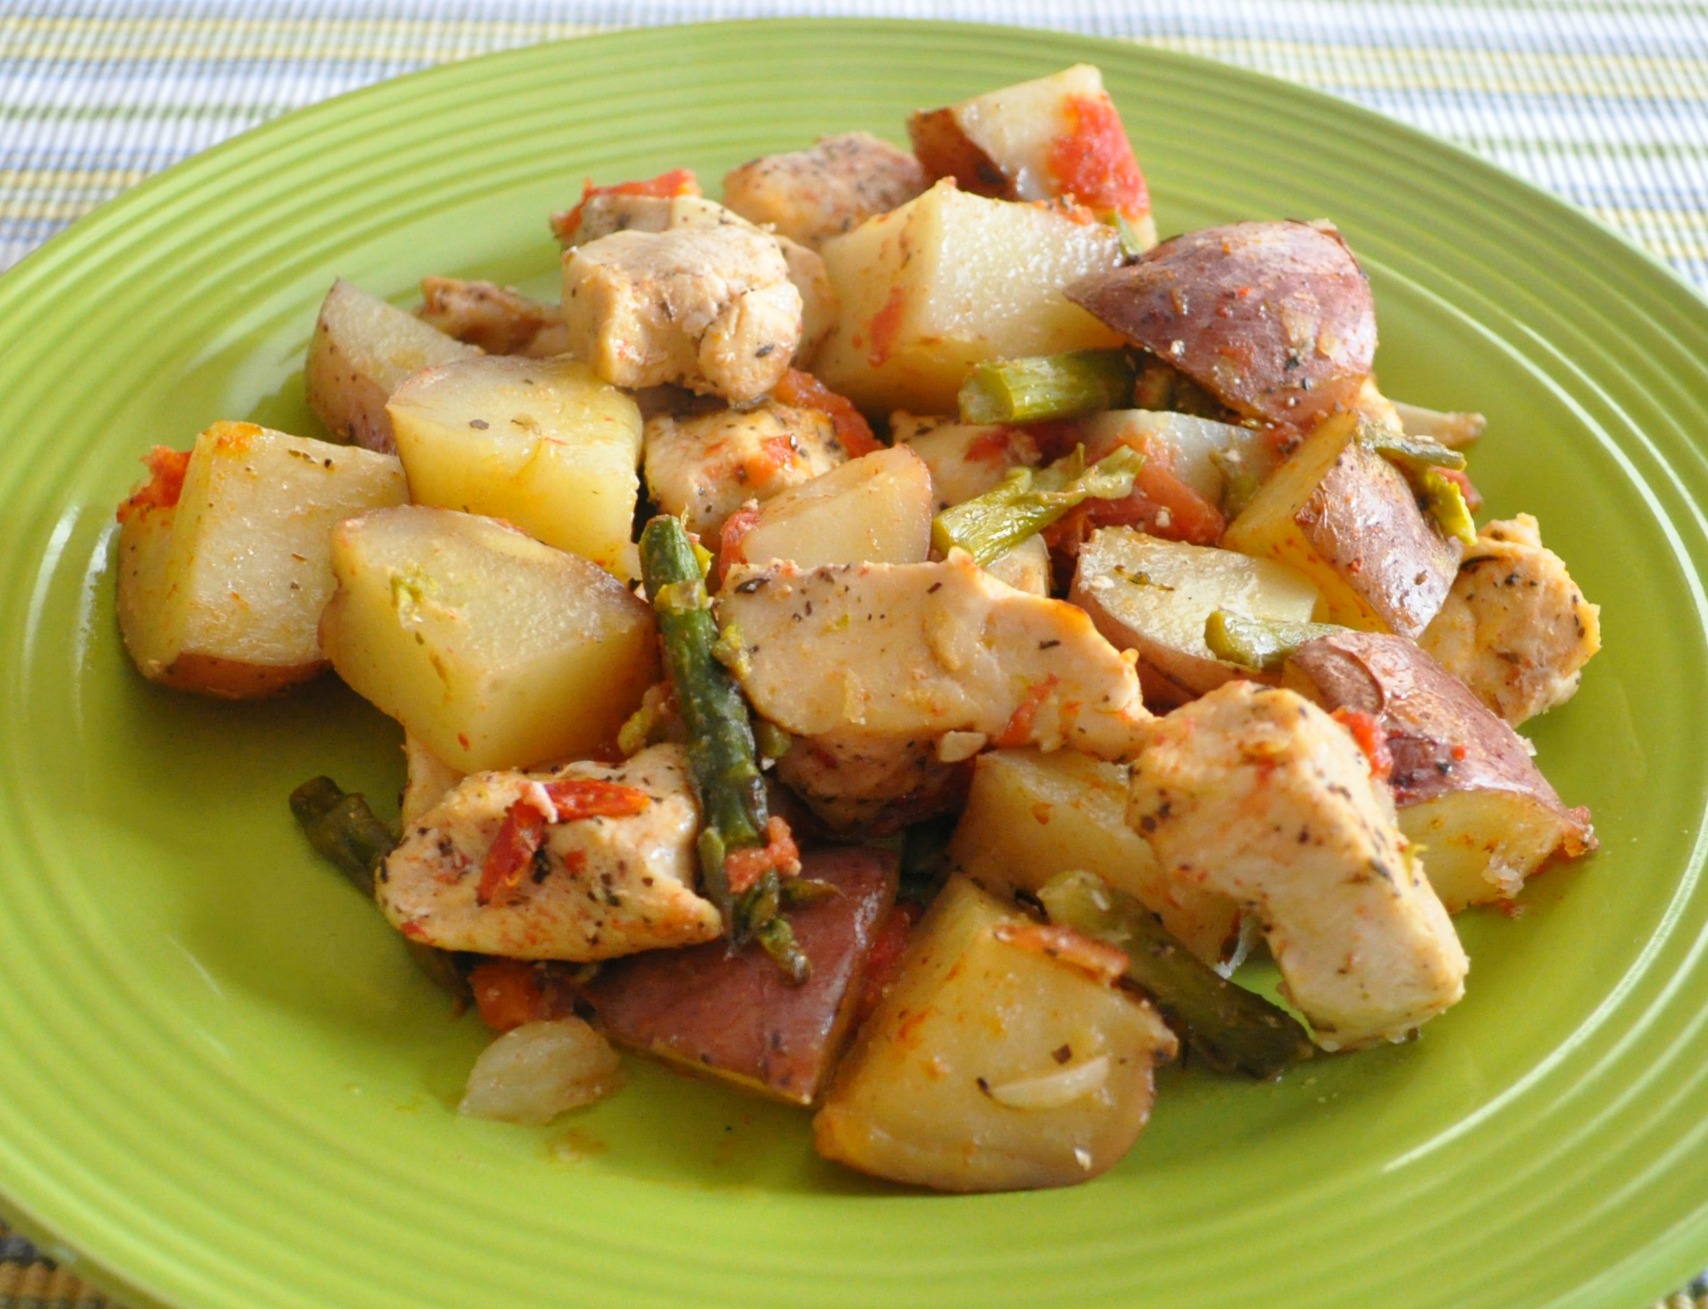 Roasted Chicken Breast with Red Potatoes and Asparagus - Mommysavers